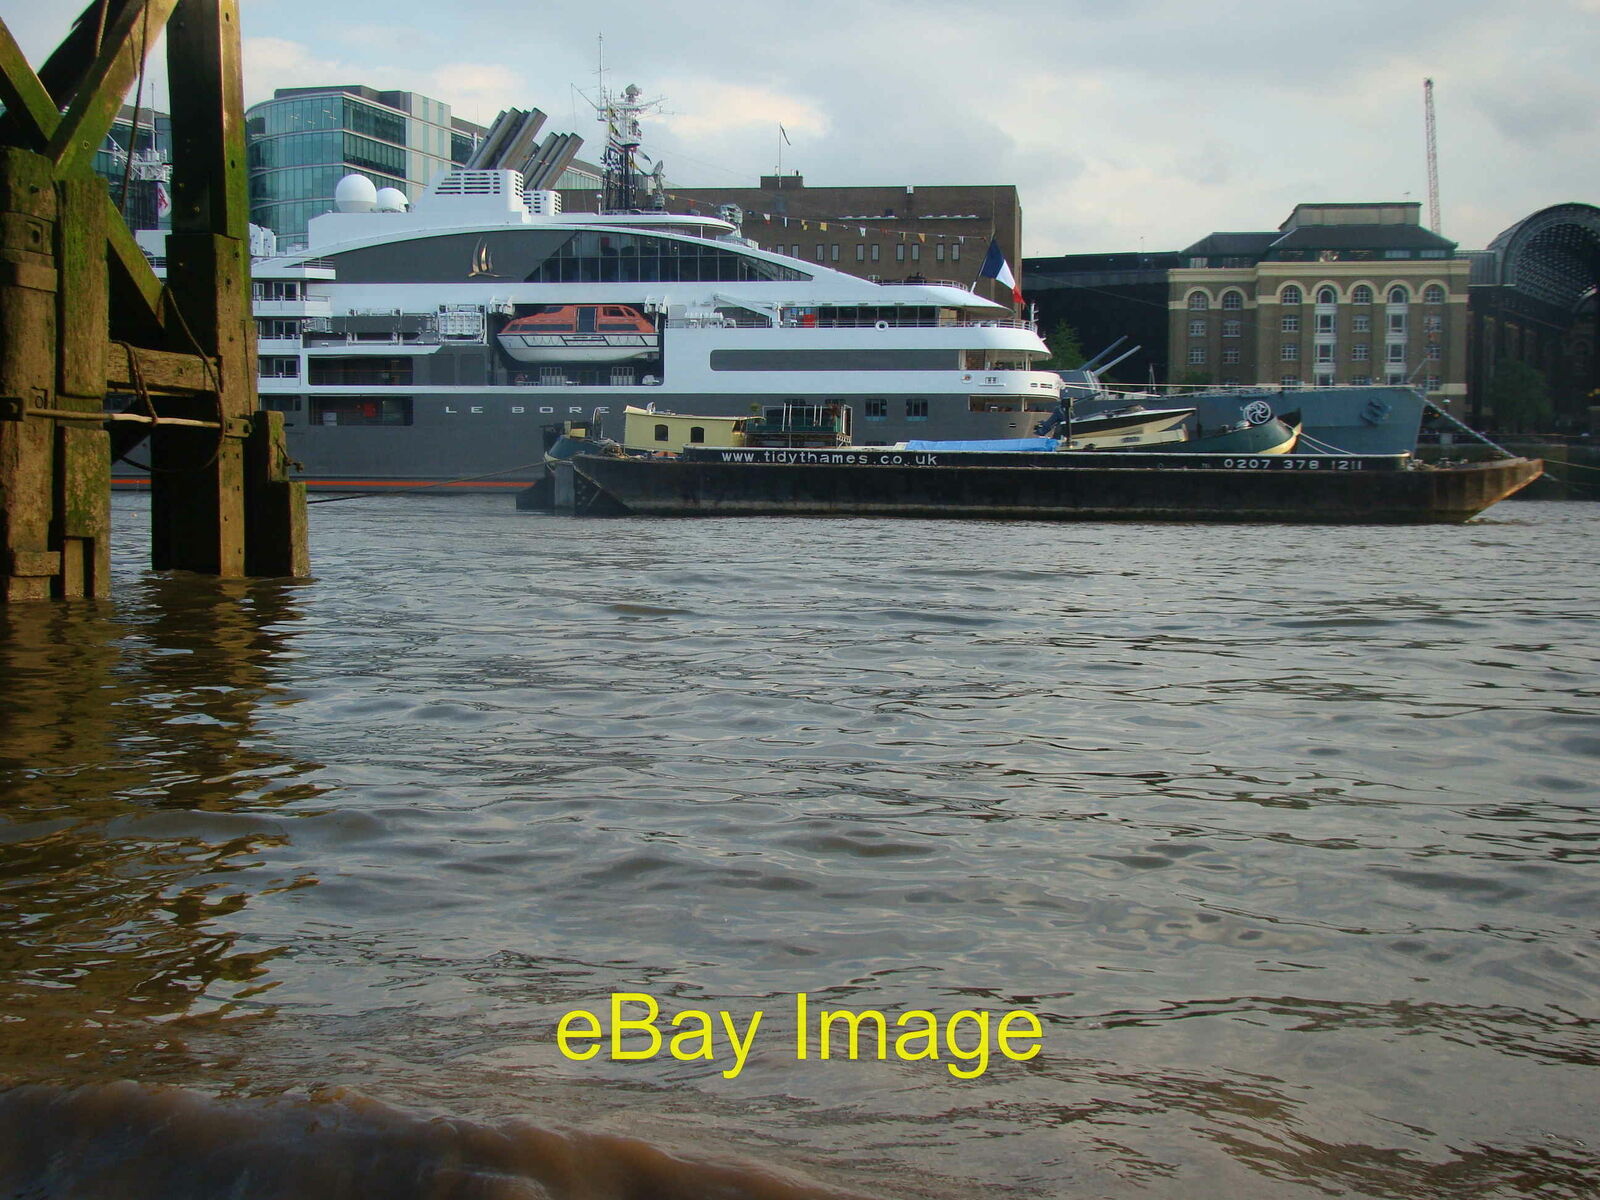 Photo 6x4 View of the Le Boreal and a barge from the Thames Beach London  c2014